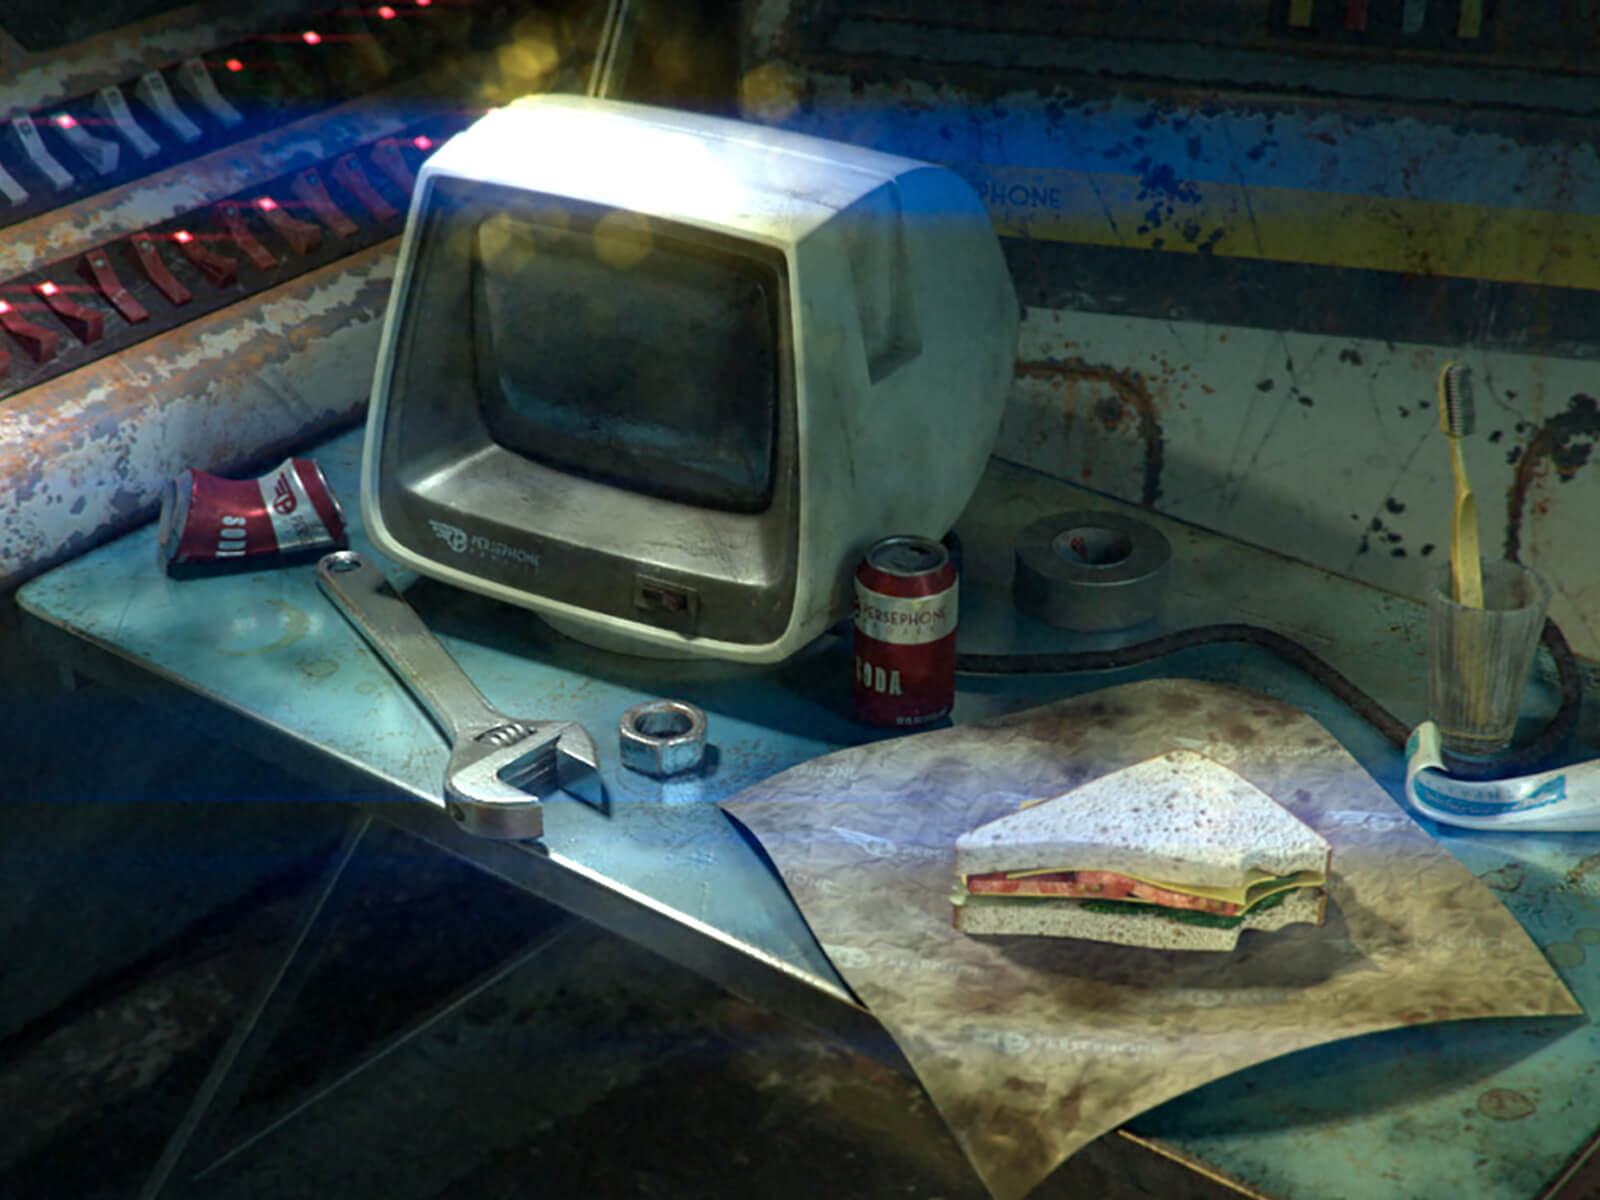 An antiquated computer monitor sits on a messy blue fold-out table with a wrench, toothbrush, and half-eaten sandwich.